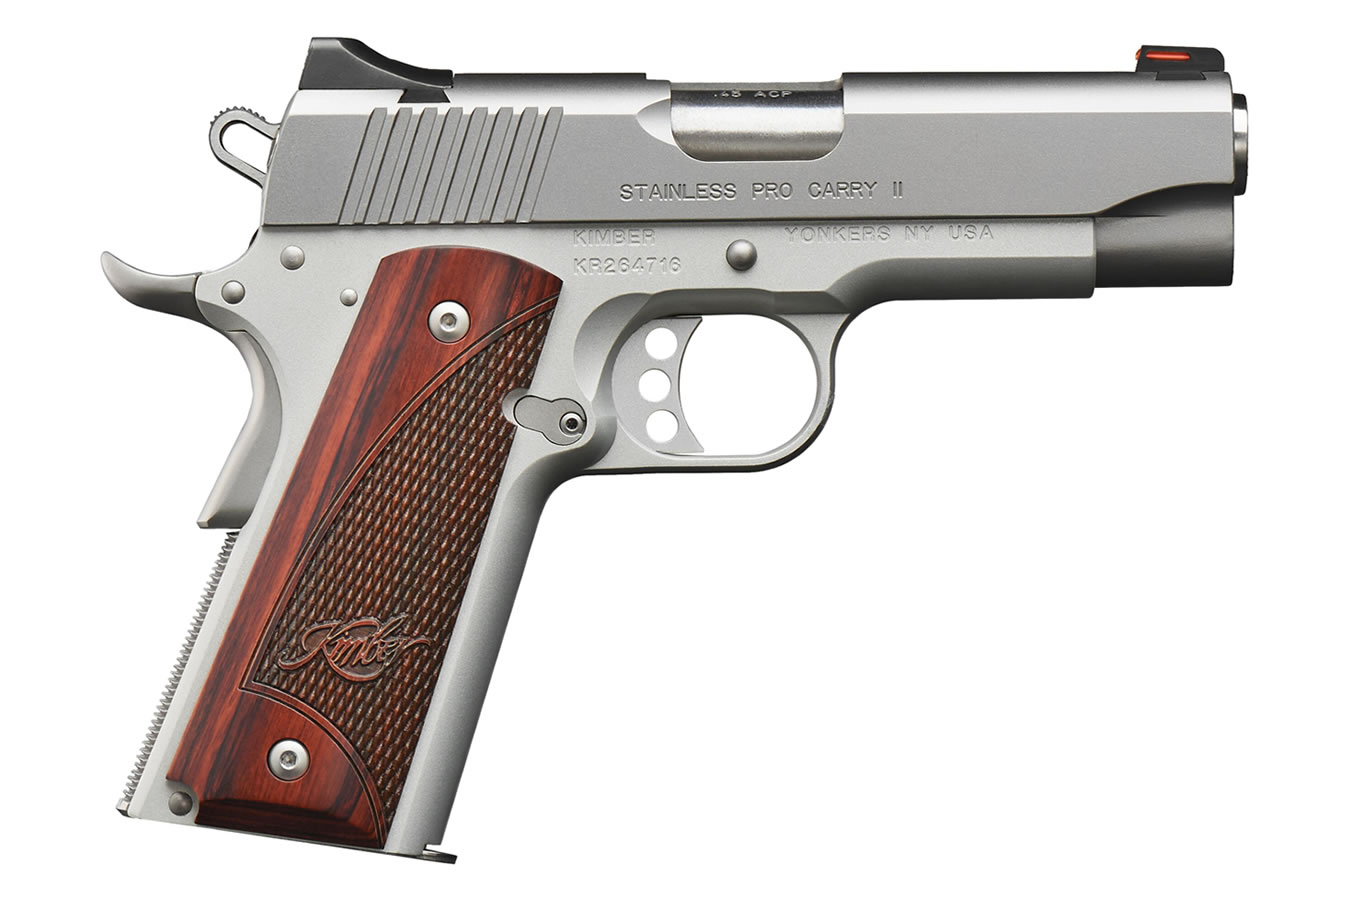 No. 20 Best Selling: KIMBER STAINLESS PRO CARRY II .45 ACP